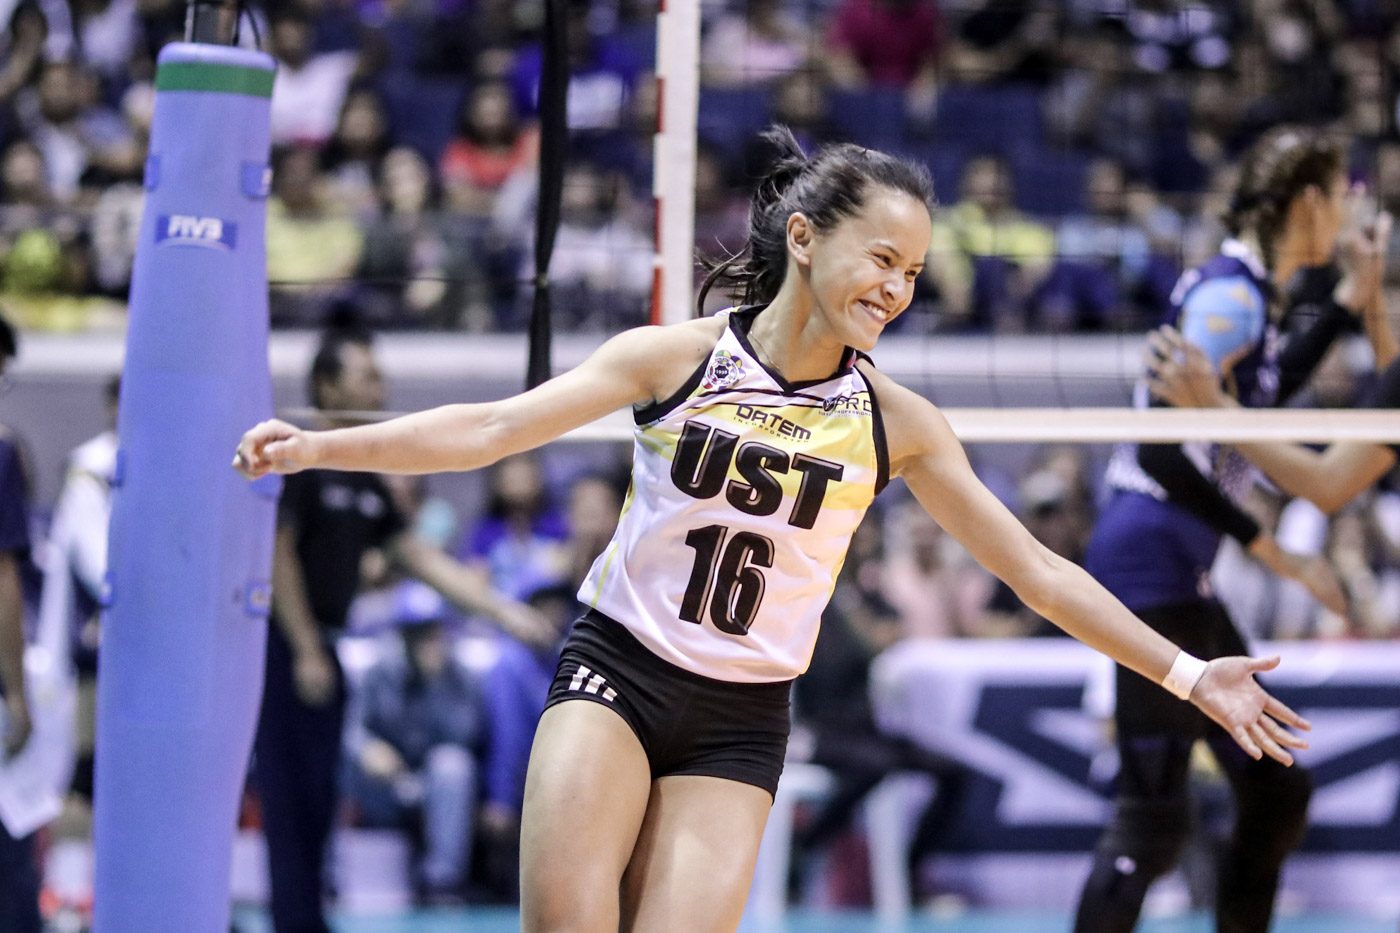 WATCH: It’s the UST Golden Tigresses’ turn to shine